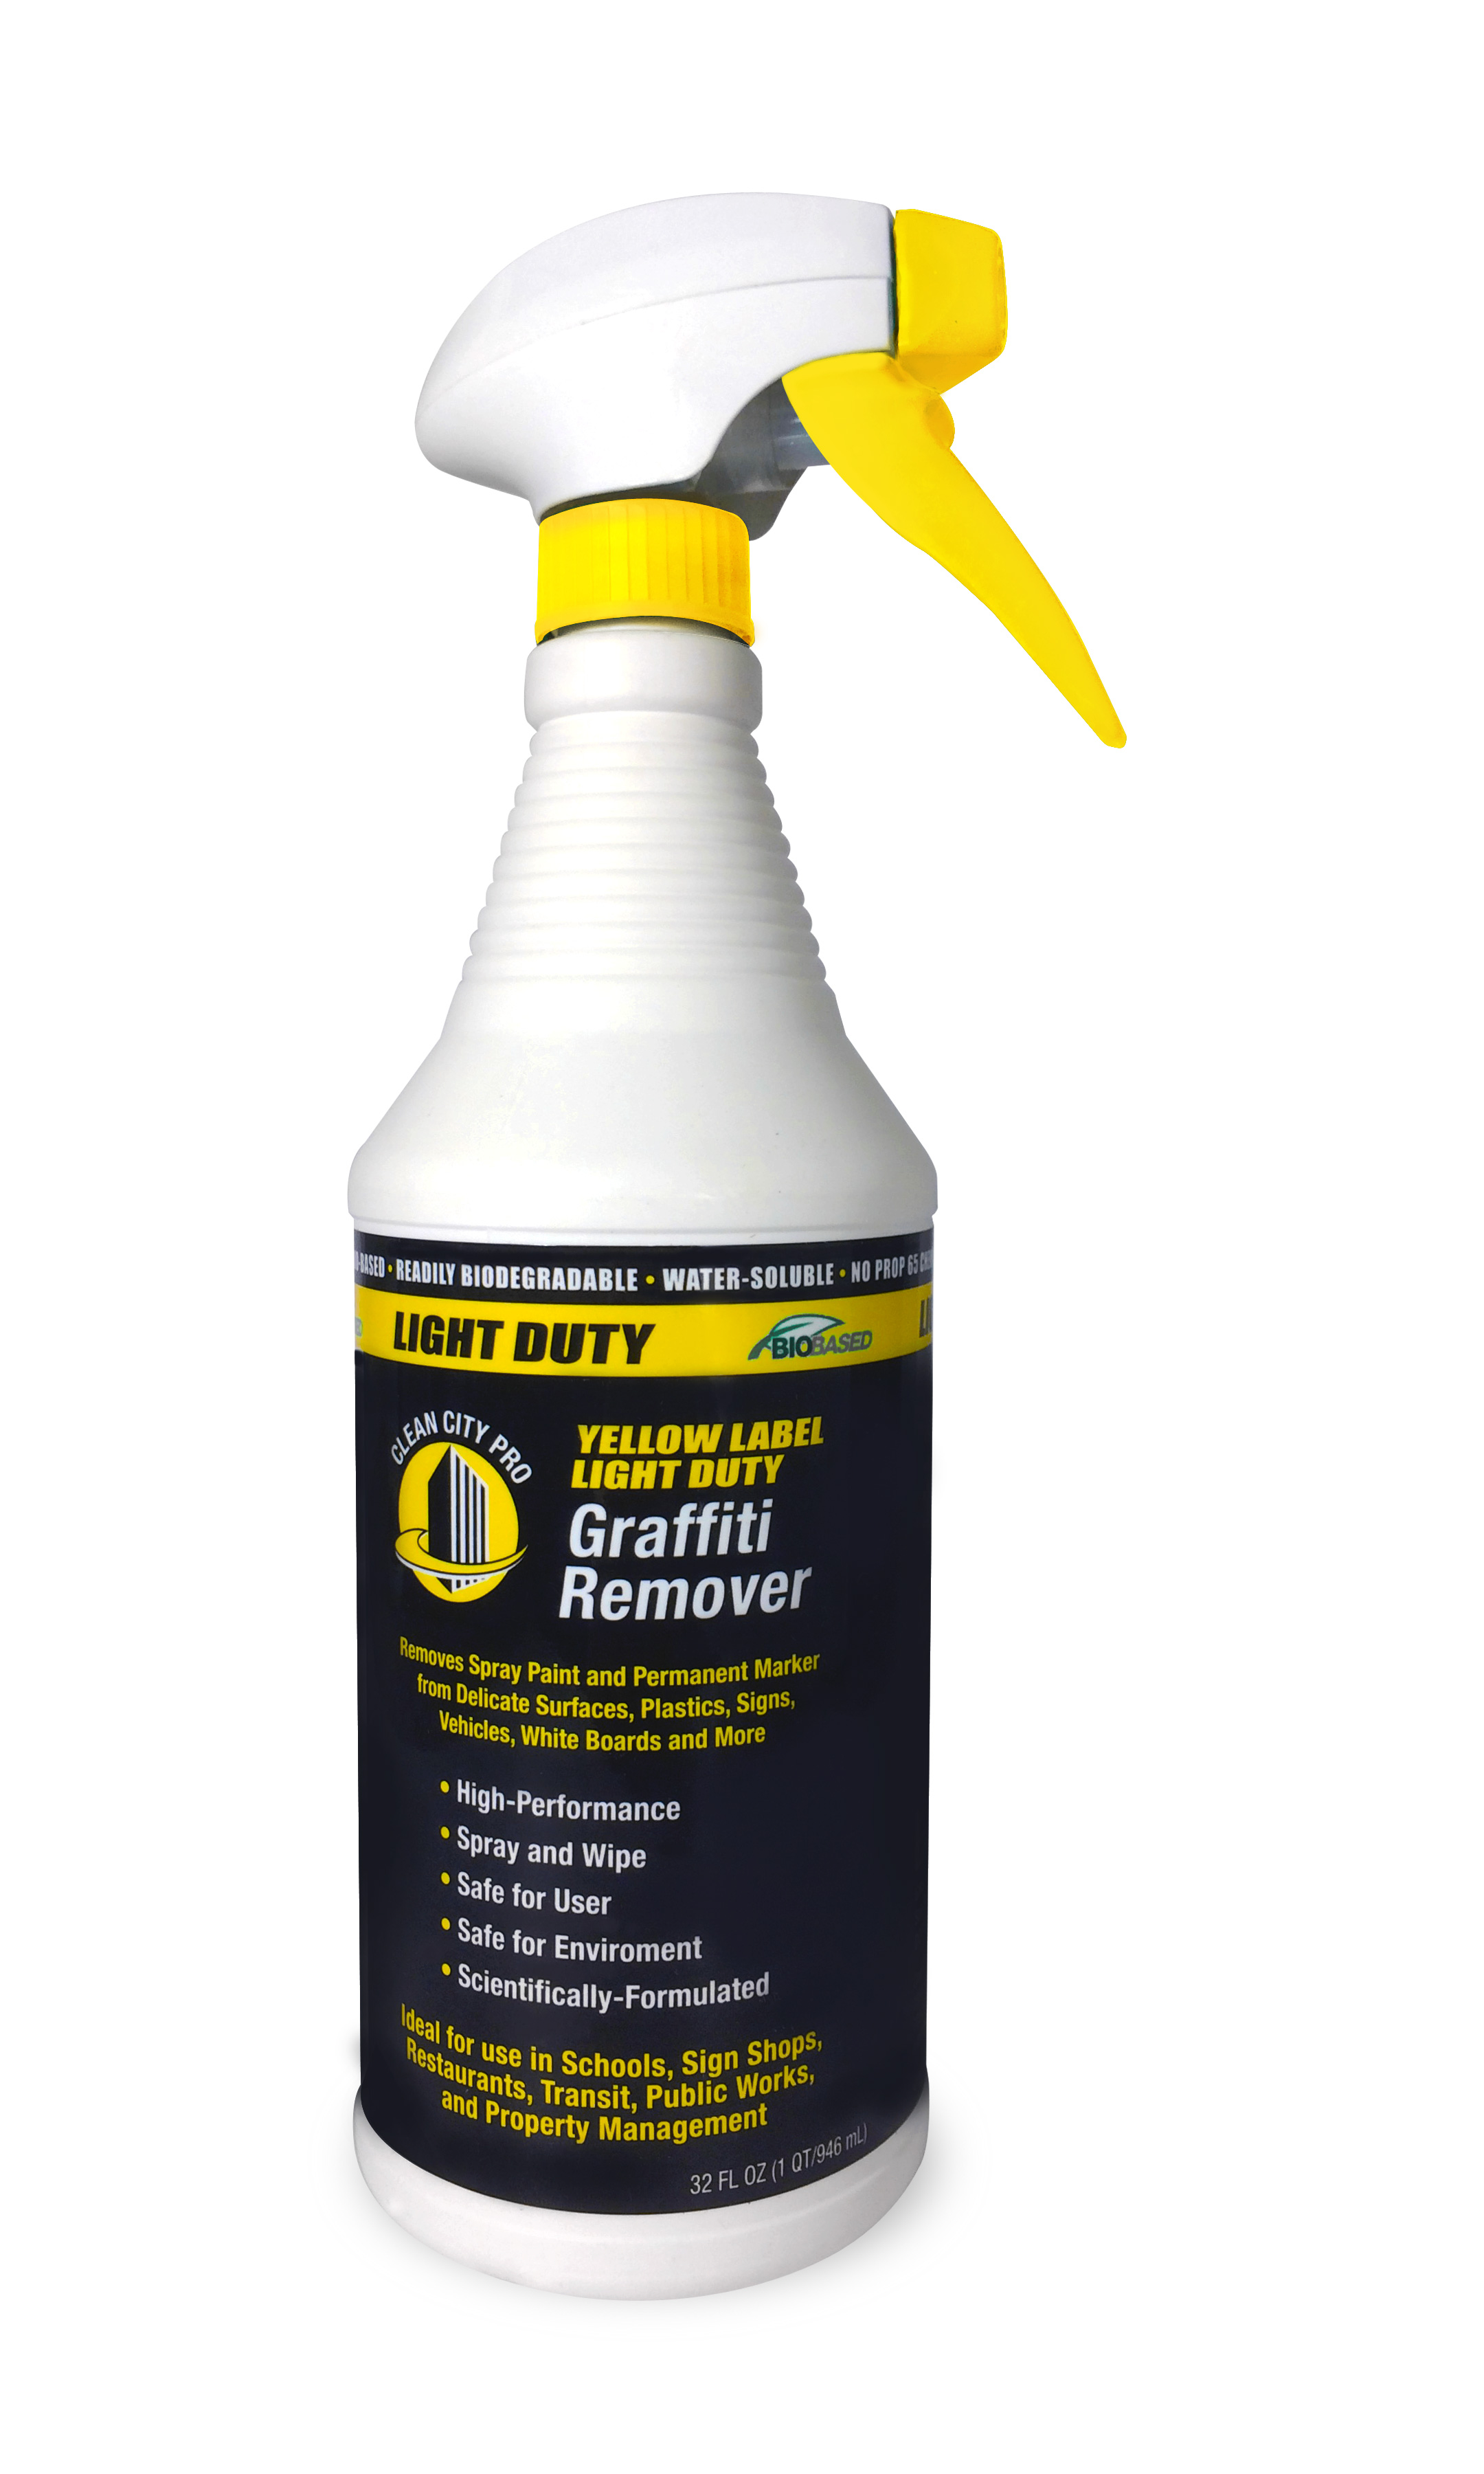 Clean City Pro Light Duty Yellow Label Graffiti Remover for Sensitive  Surfaces